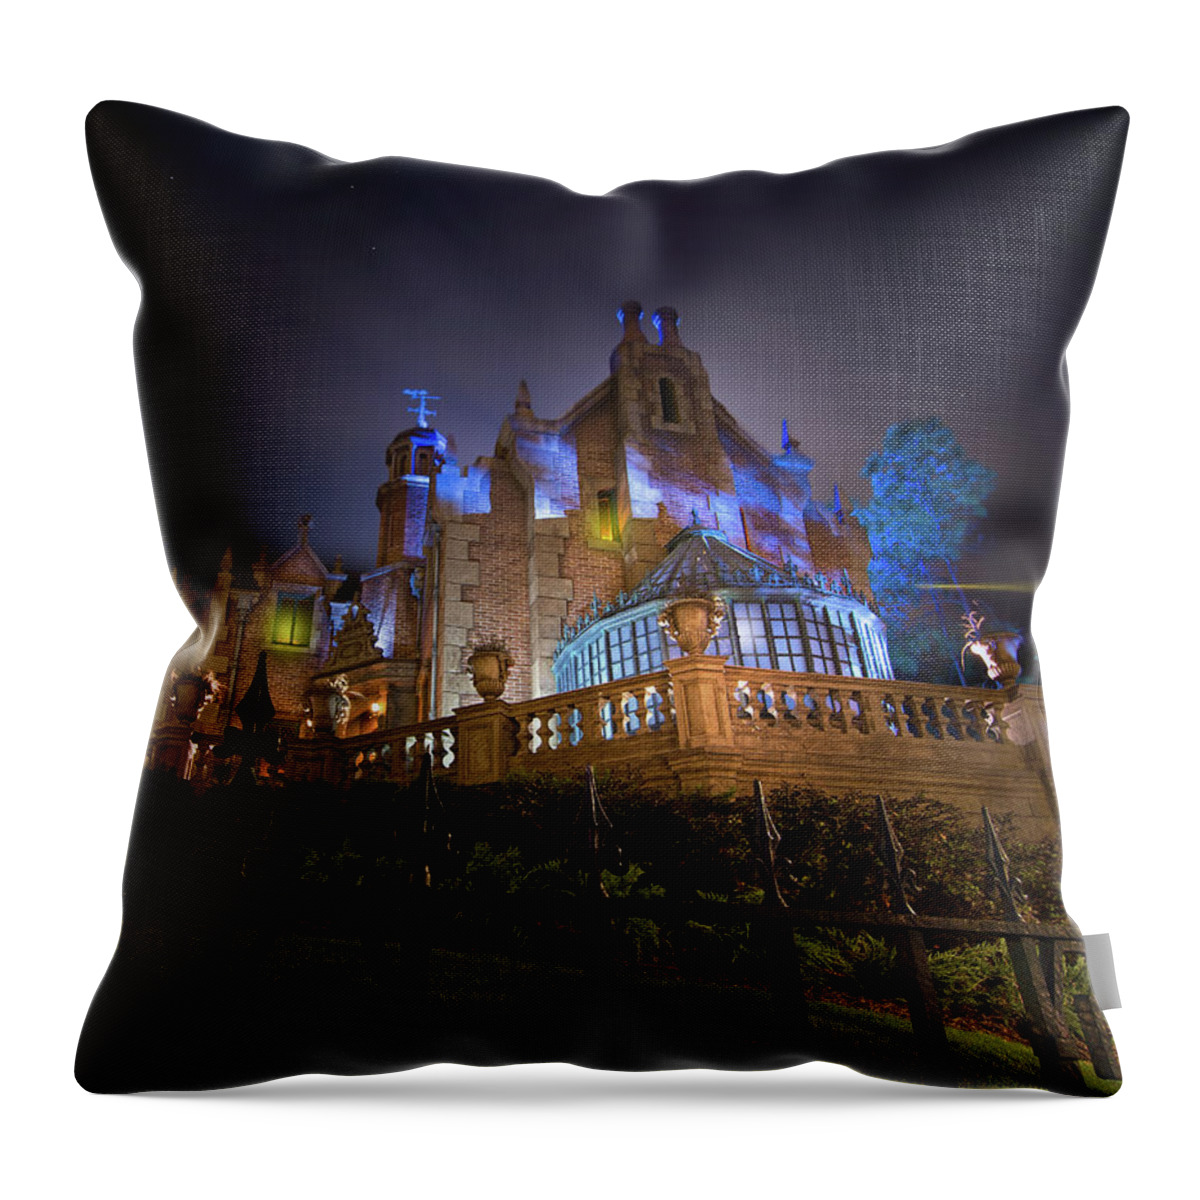 Disney Haunted Mansion Throw Pillow featuring the photograph The Haunted Mansion at Walt Disney World by Mark Andrew Thomas